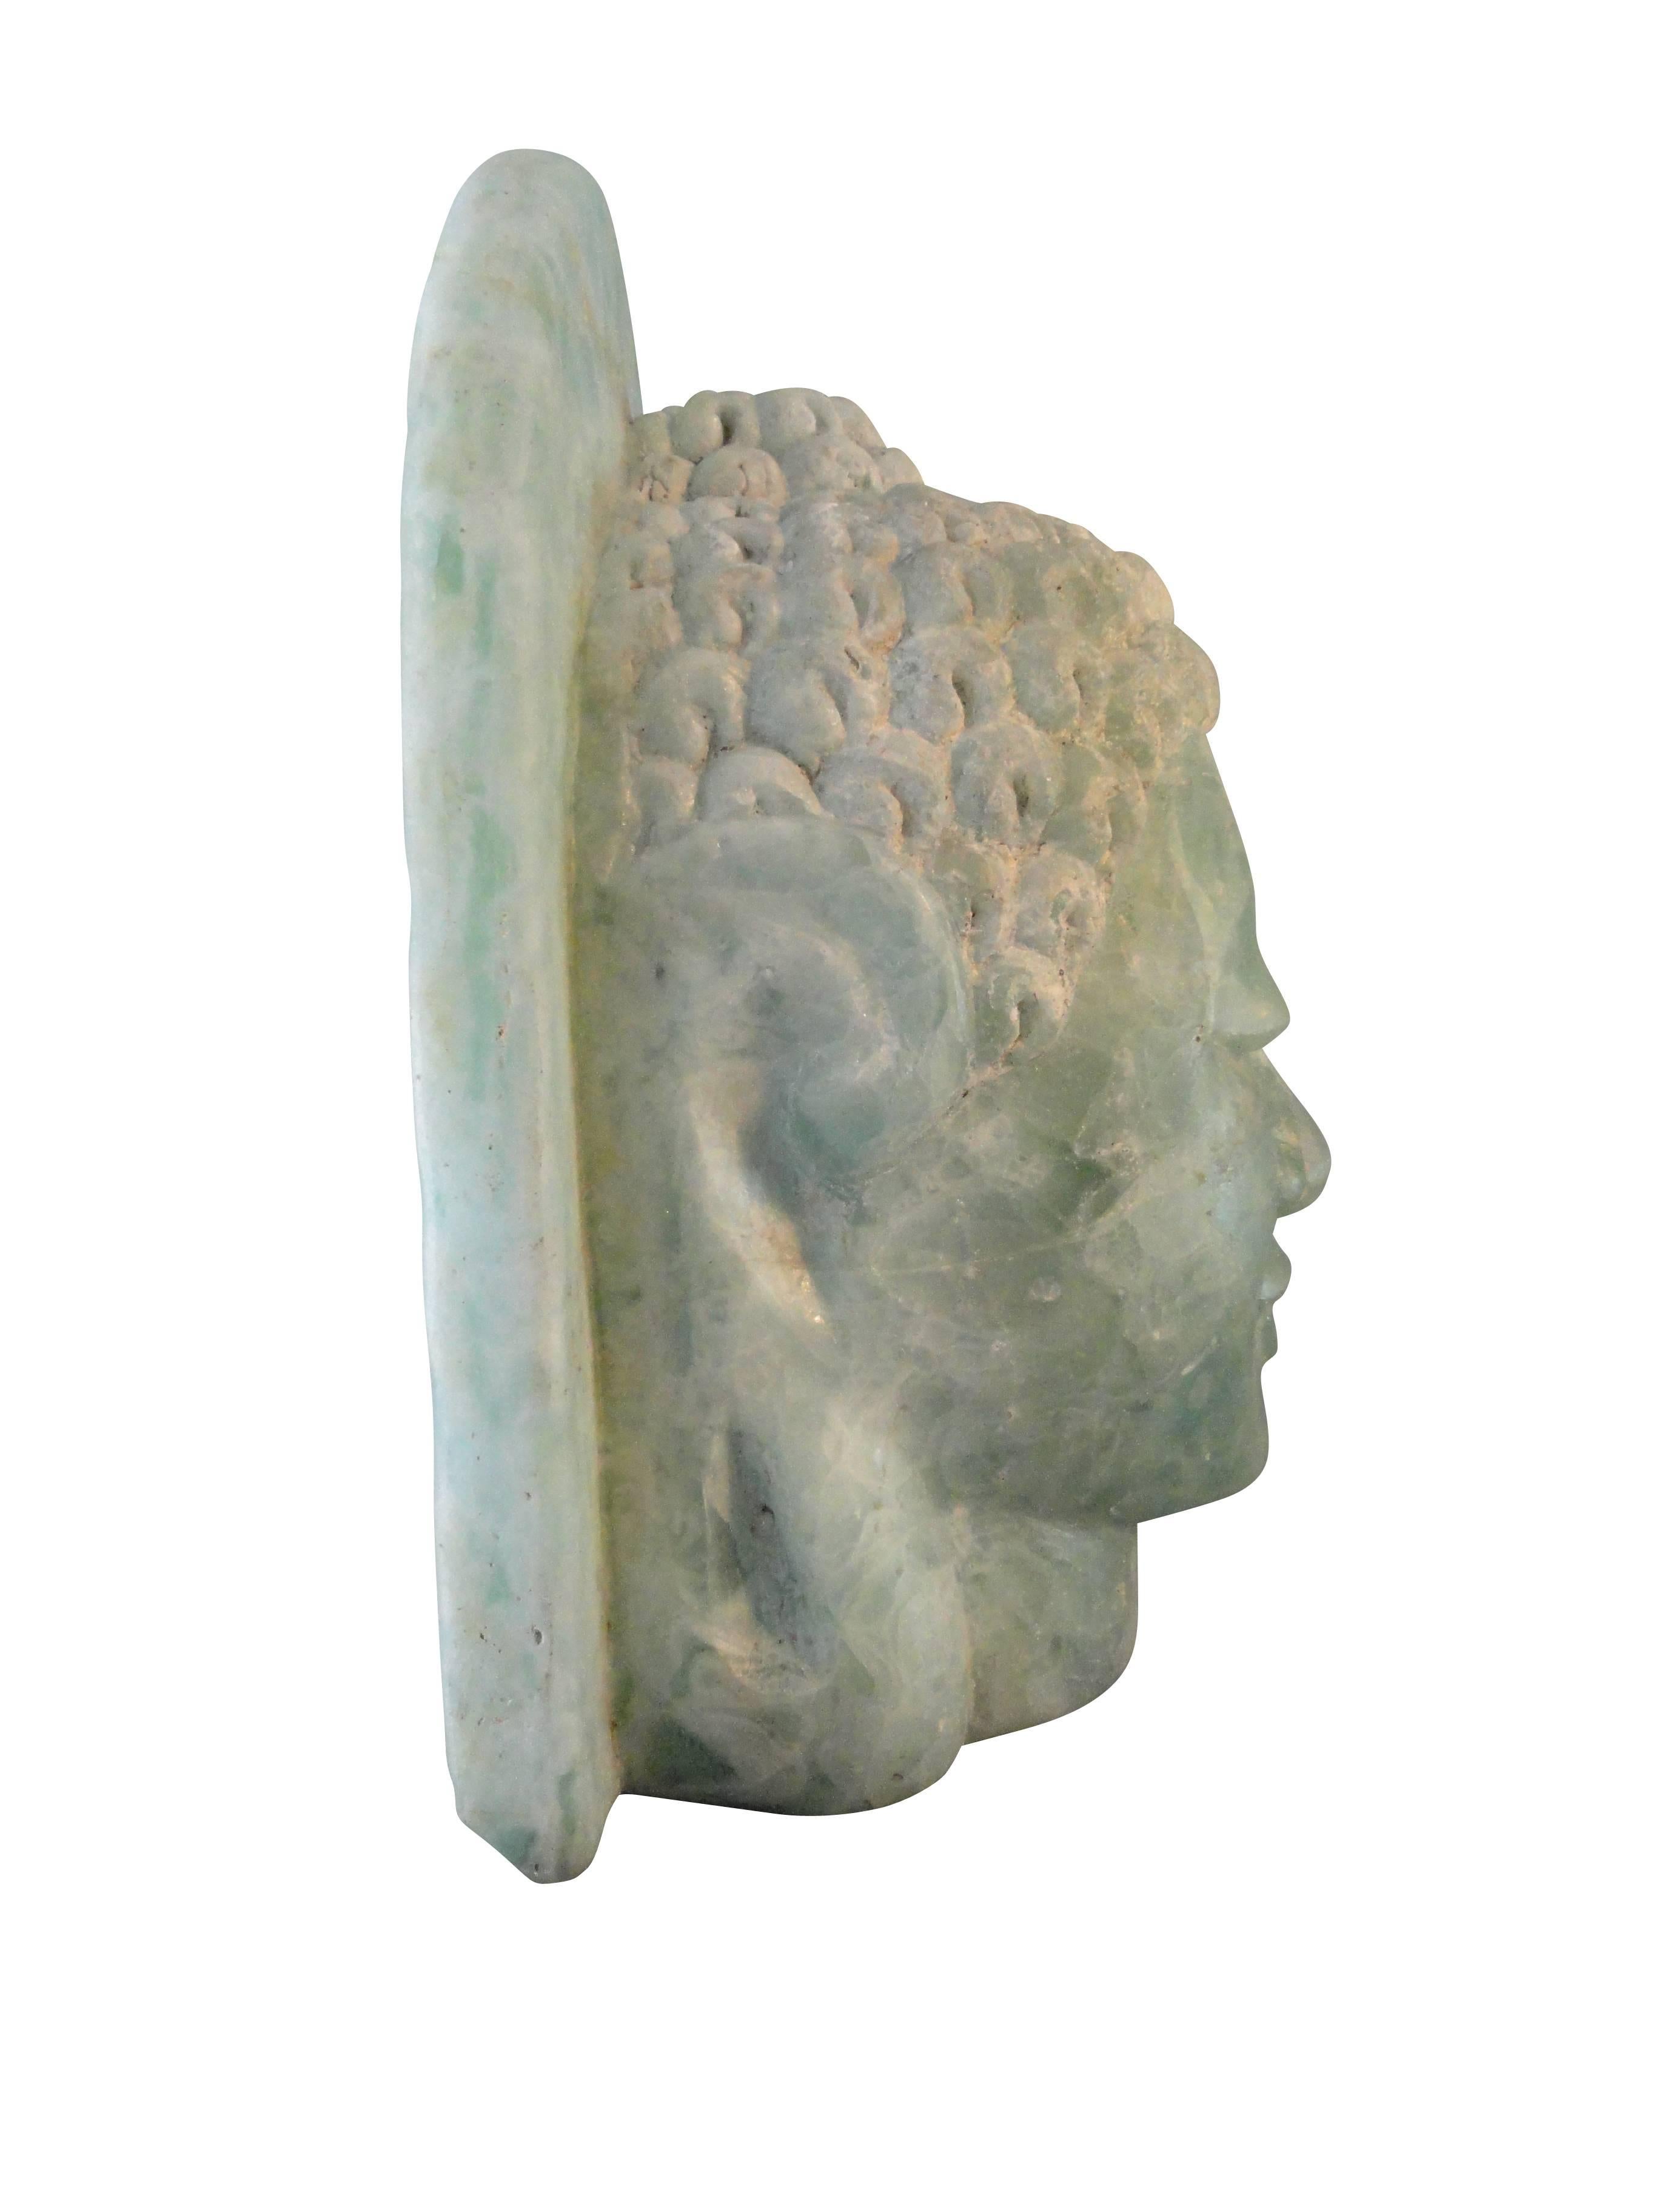 20th century oriental folded glass Buddha head sculpture.
Extremely heavy, approximately 250#.